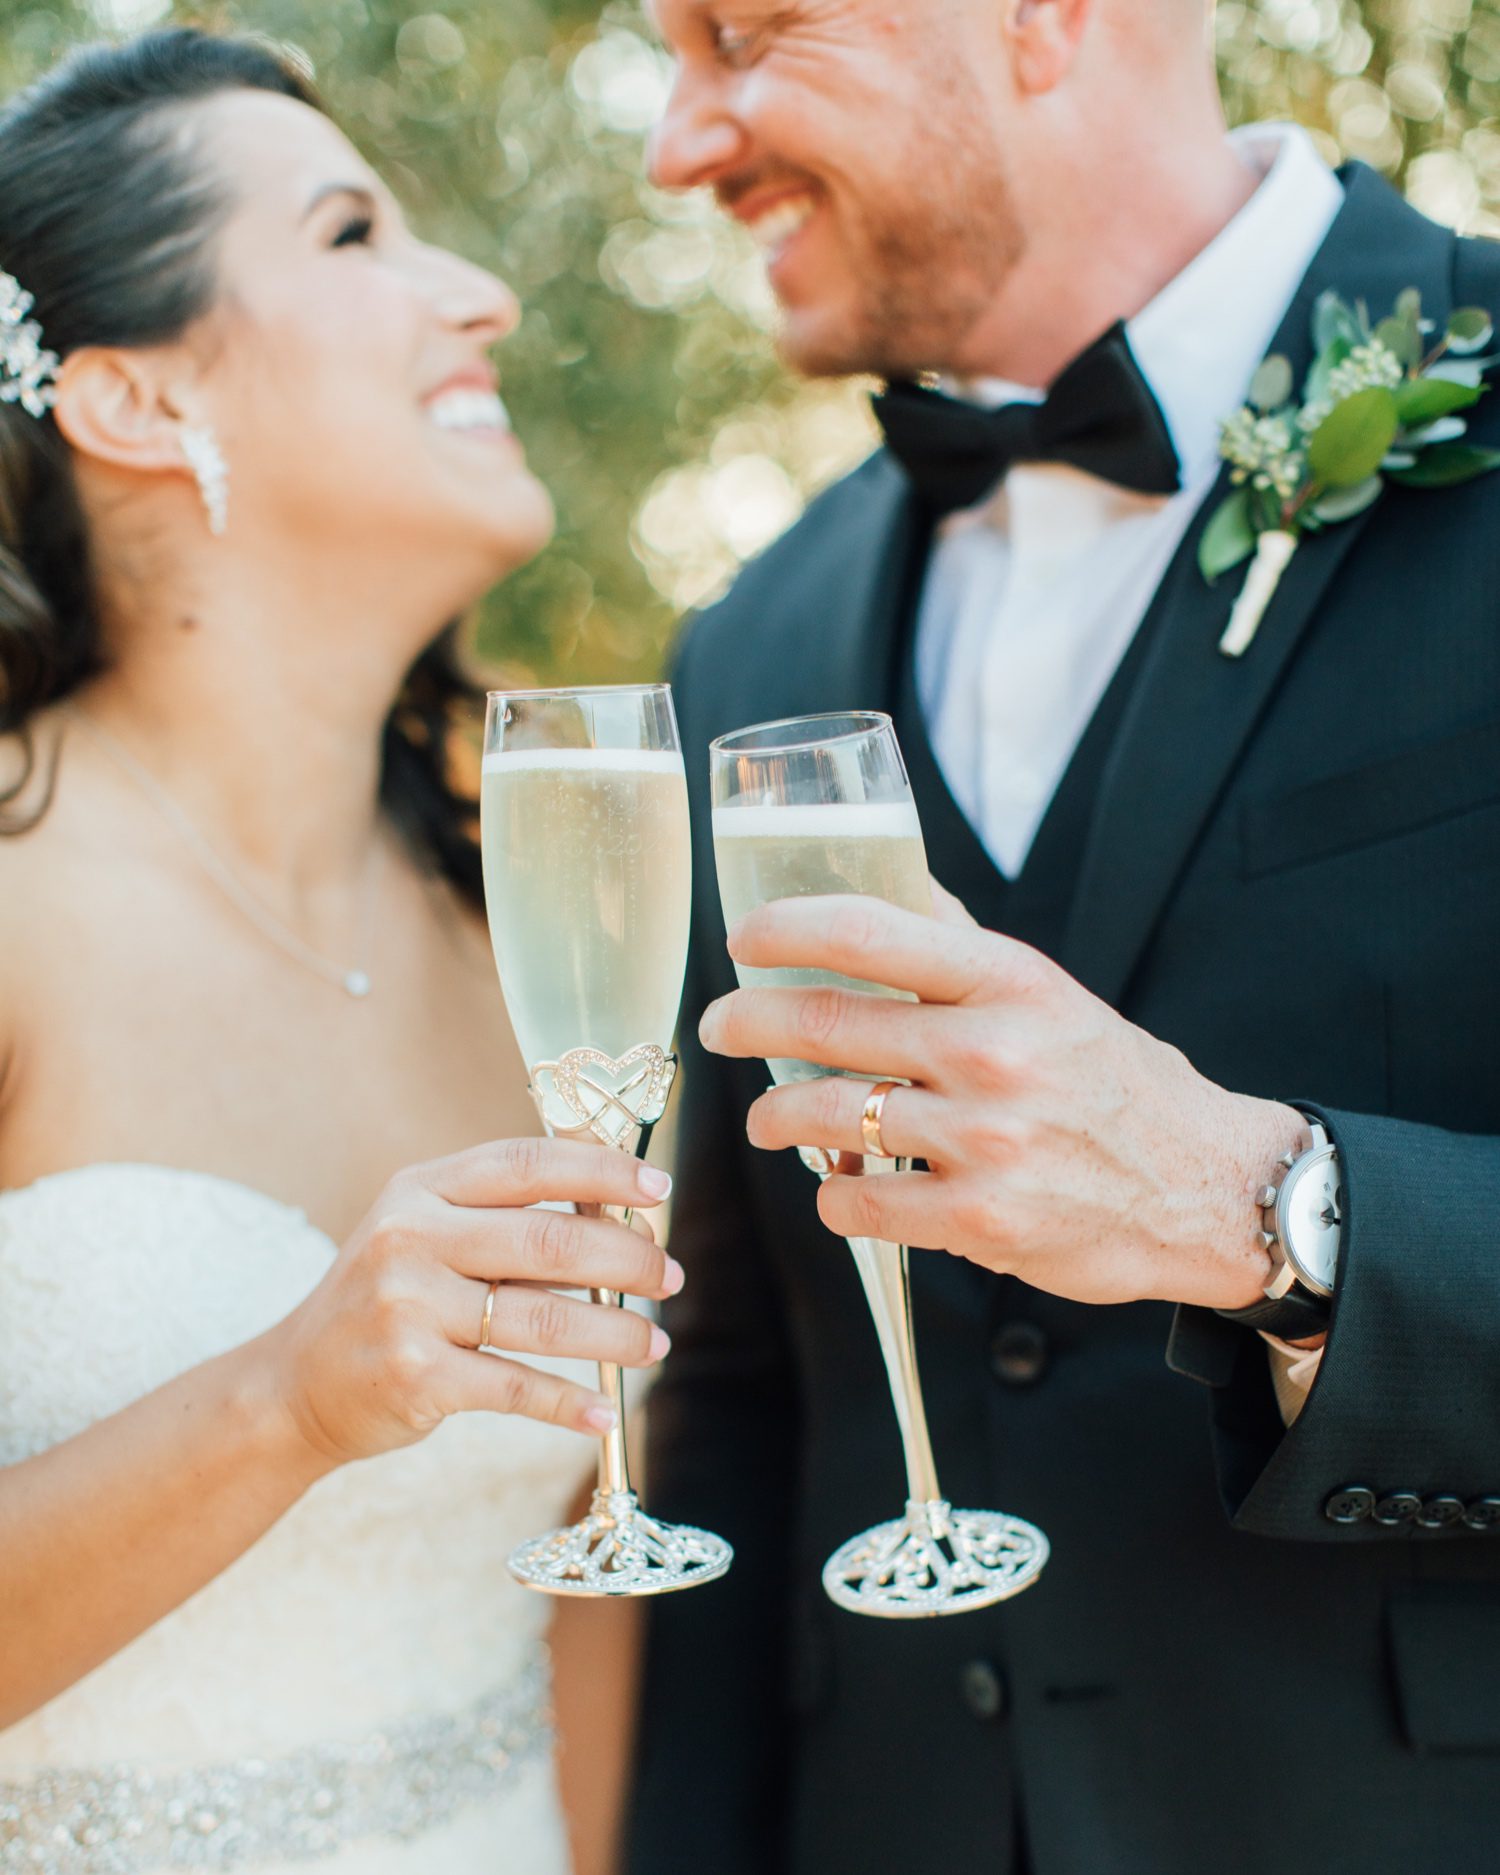 Bride and Groom drinking champagne while smiling at each other